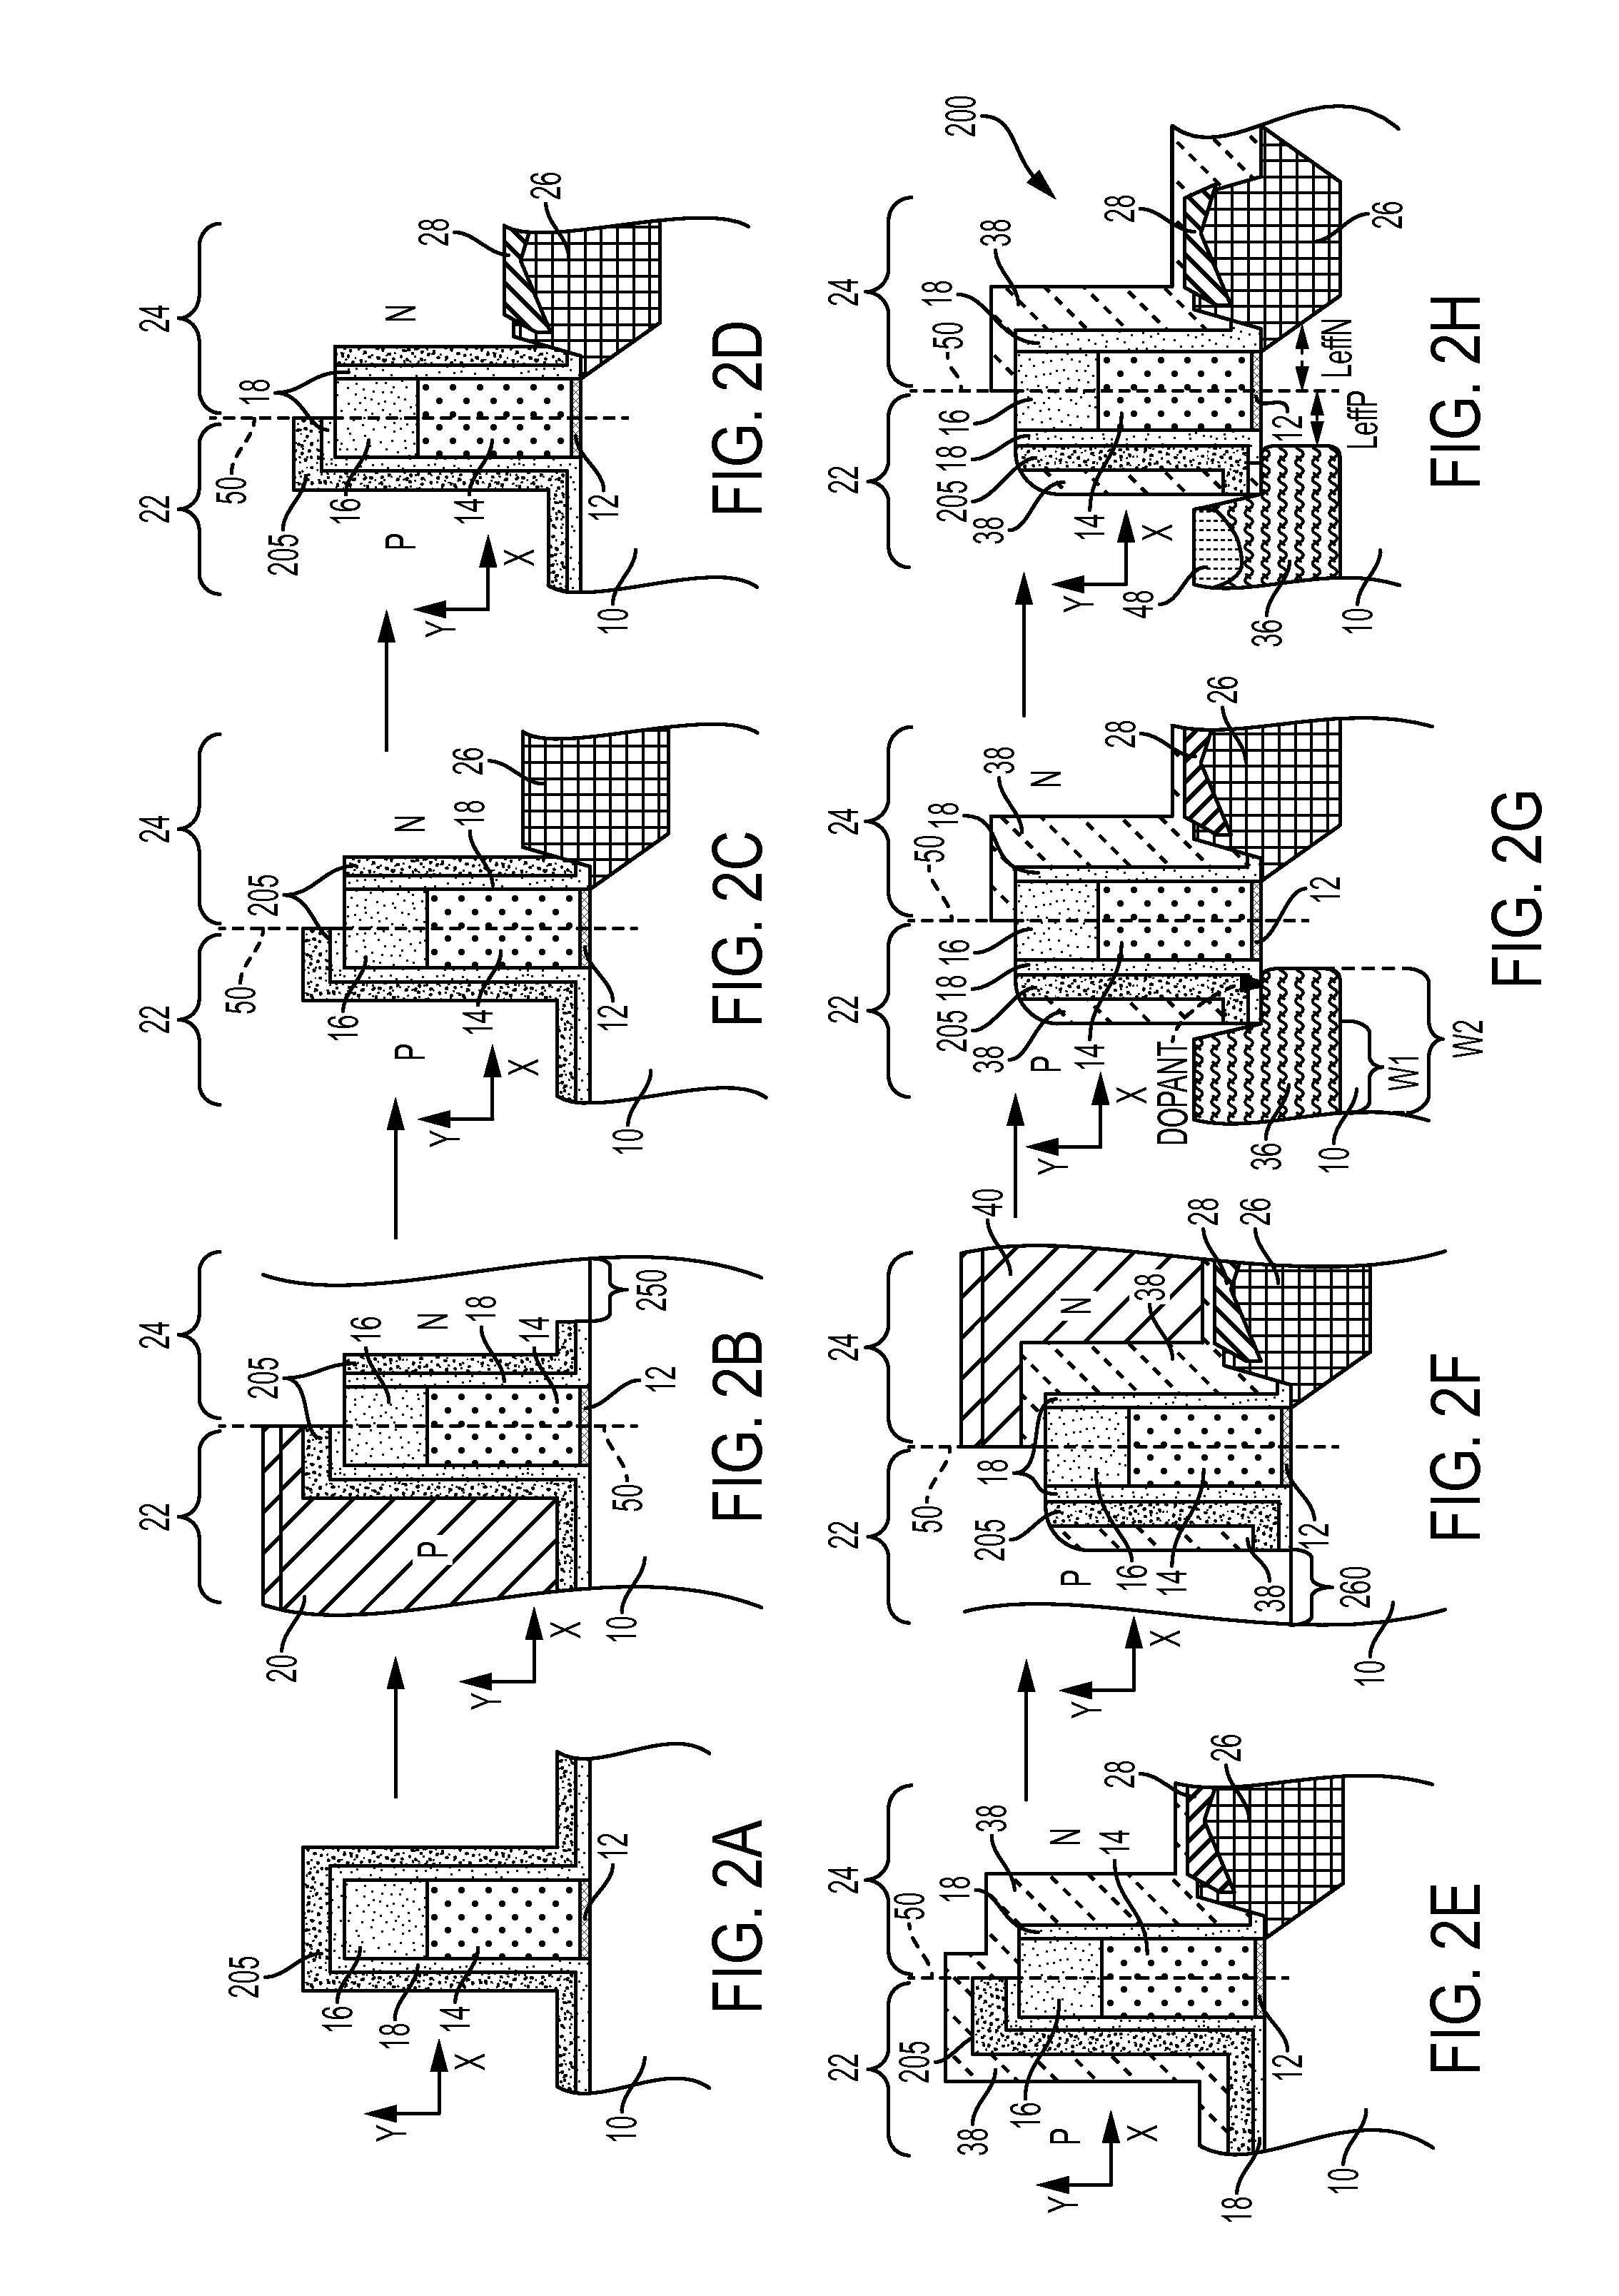 Symmetrical extension junction formation with low-k spacer and dual epitaxial process in finfet device